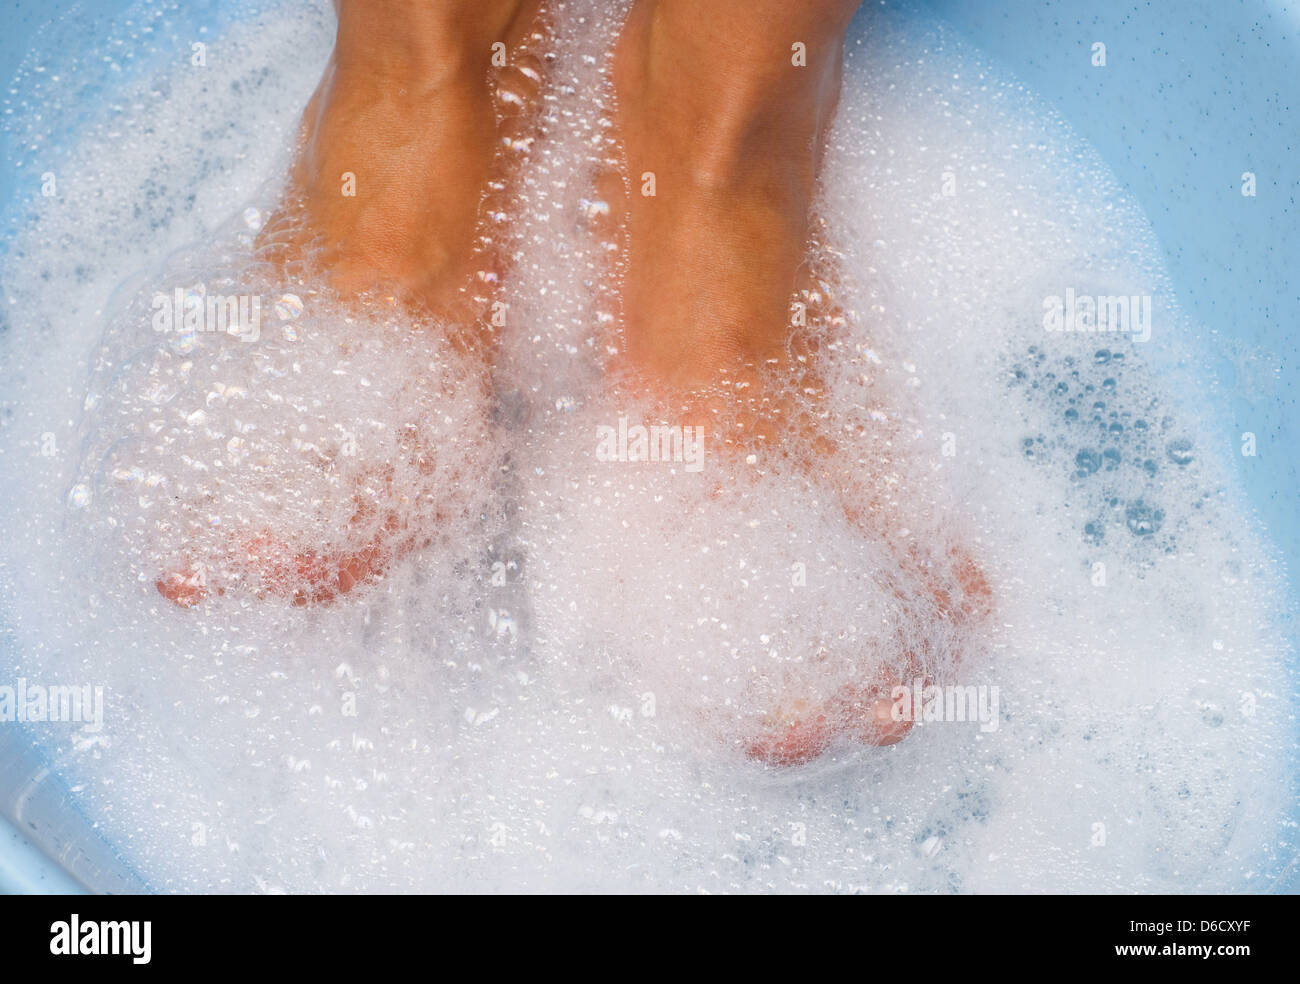 legs in spume Stock Photo